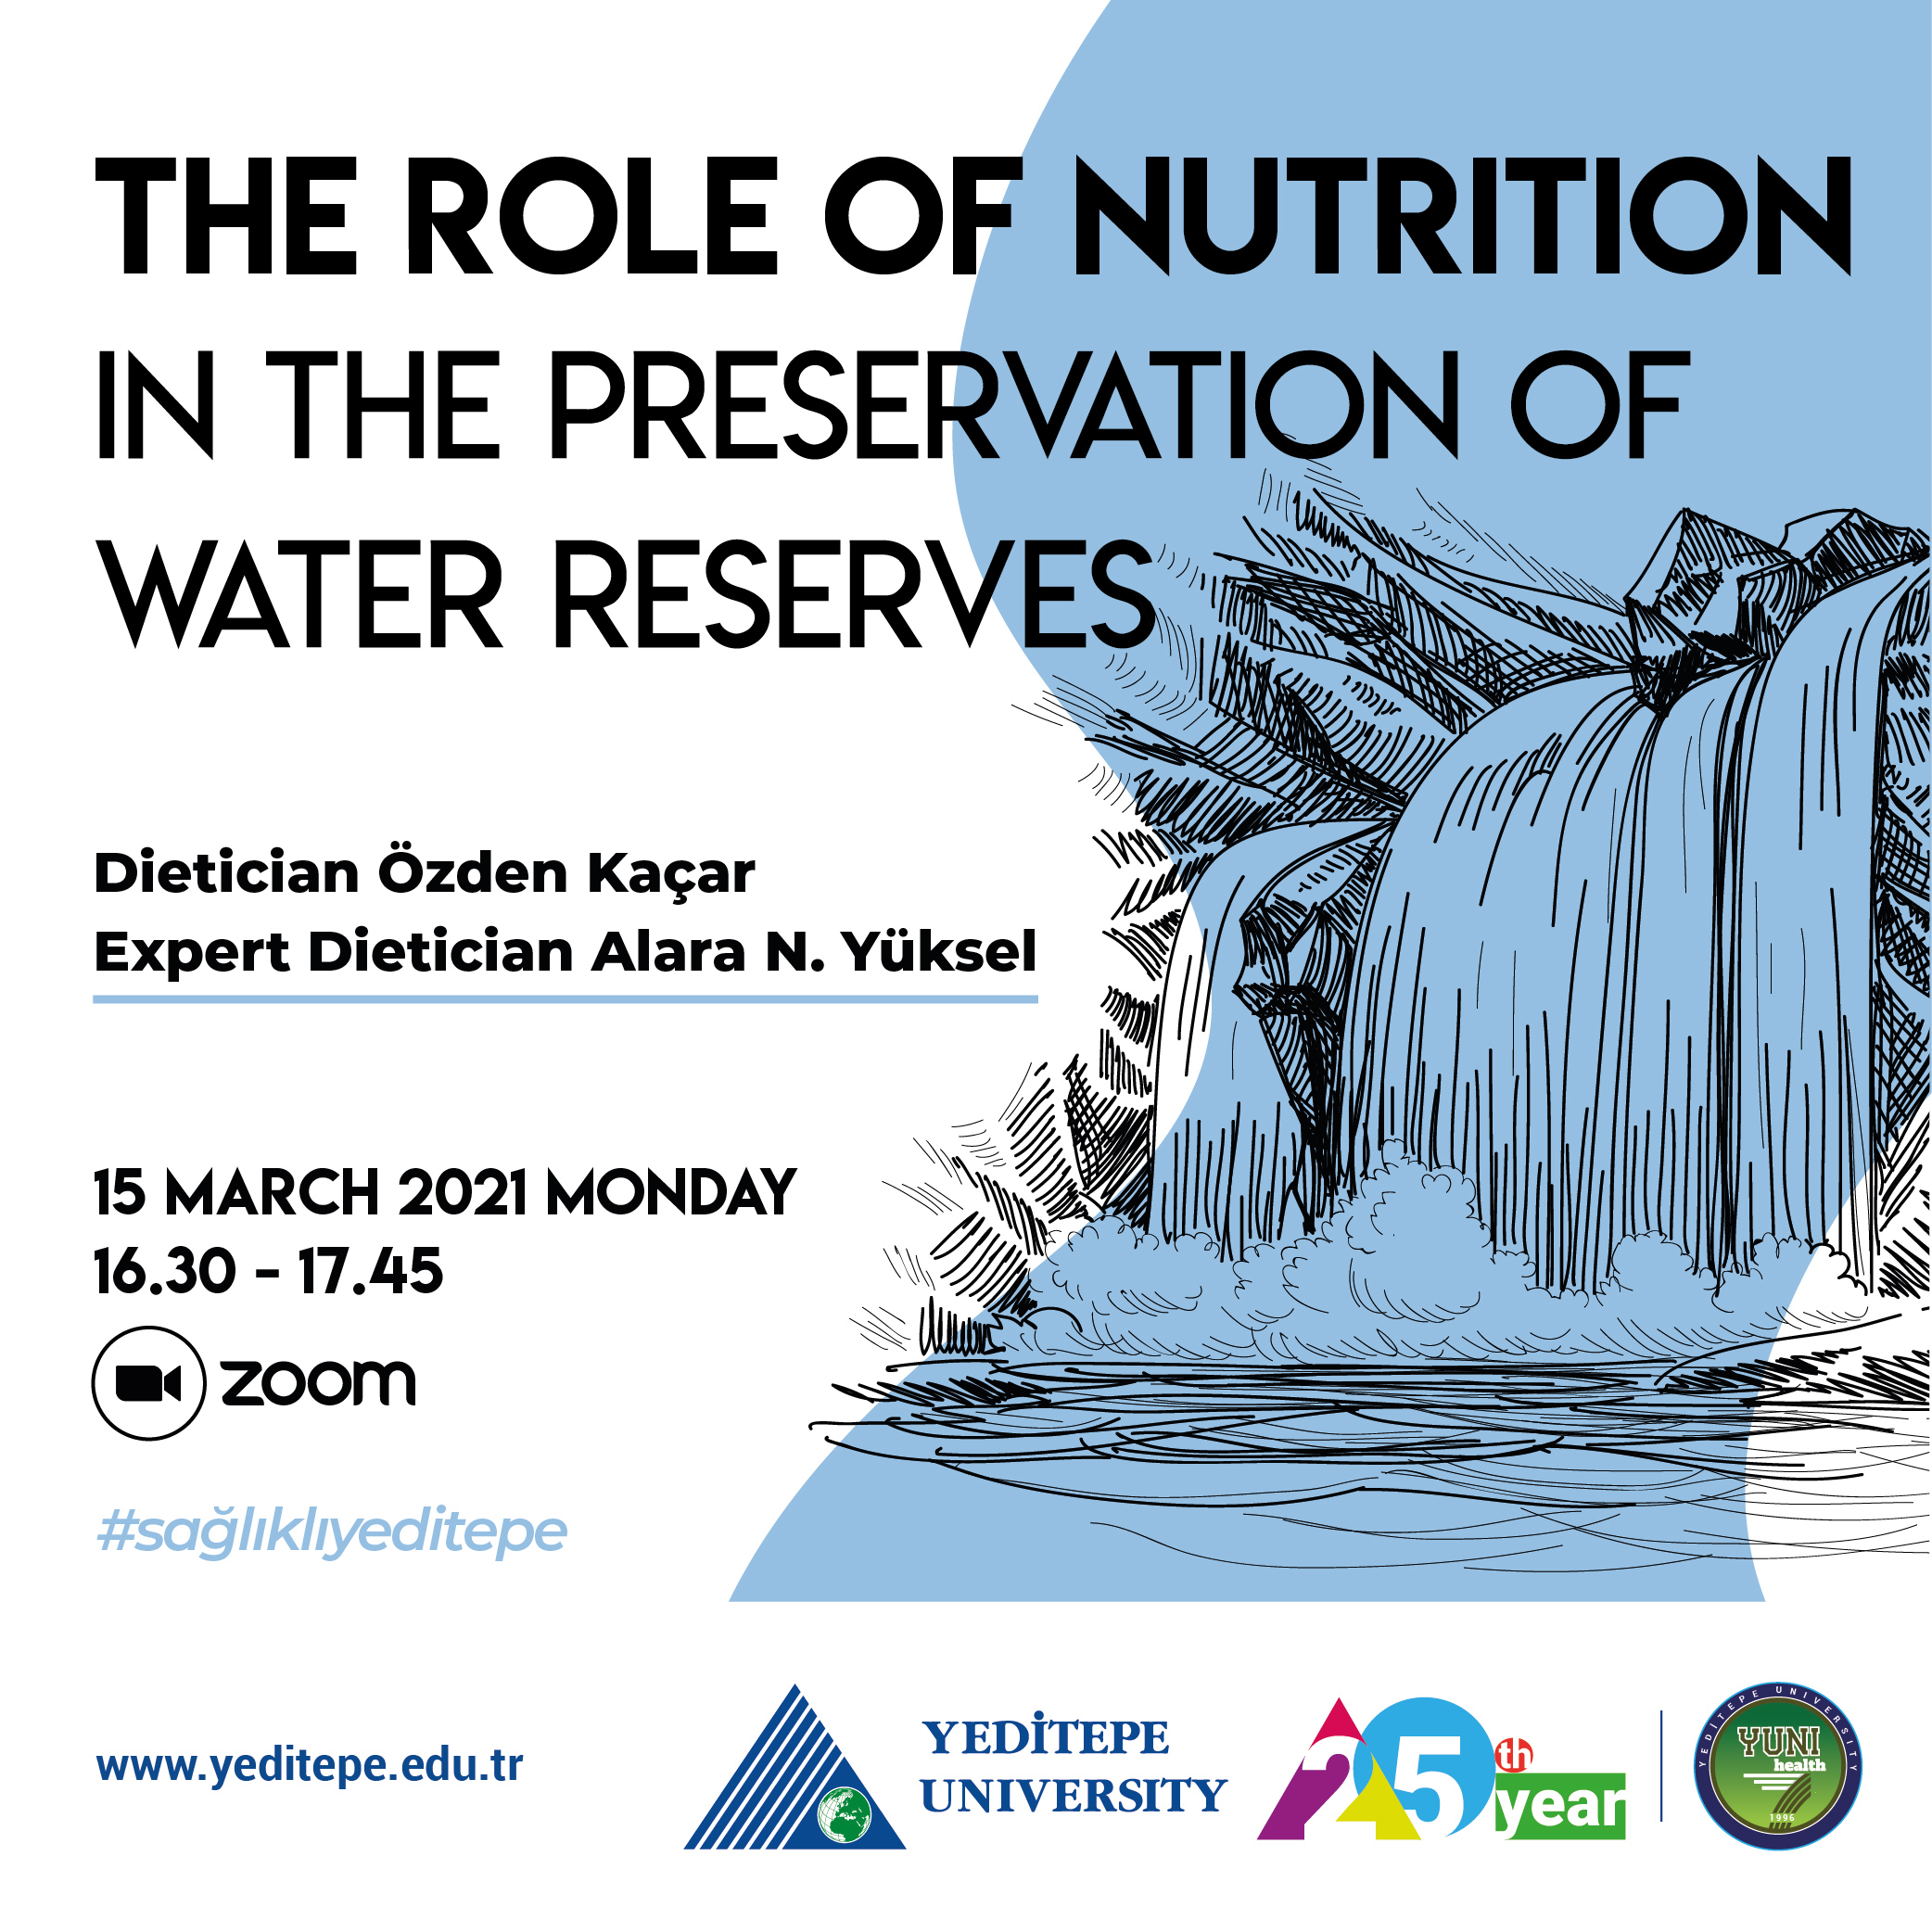 The Role of Nutrition in The Preservation of Water Reserves